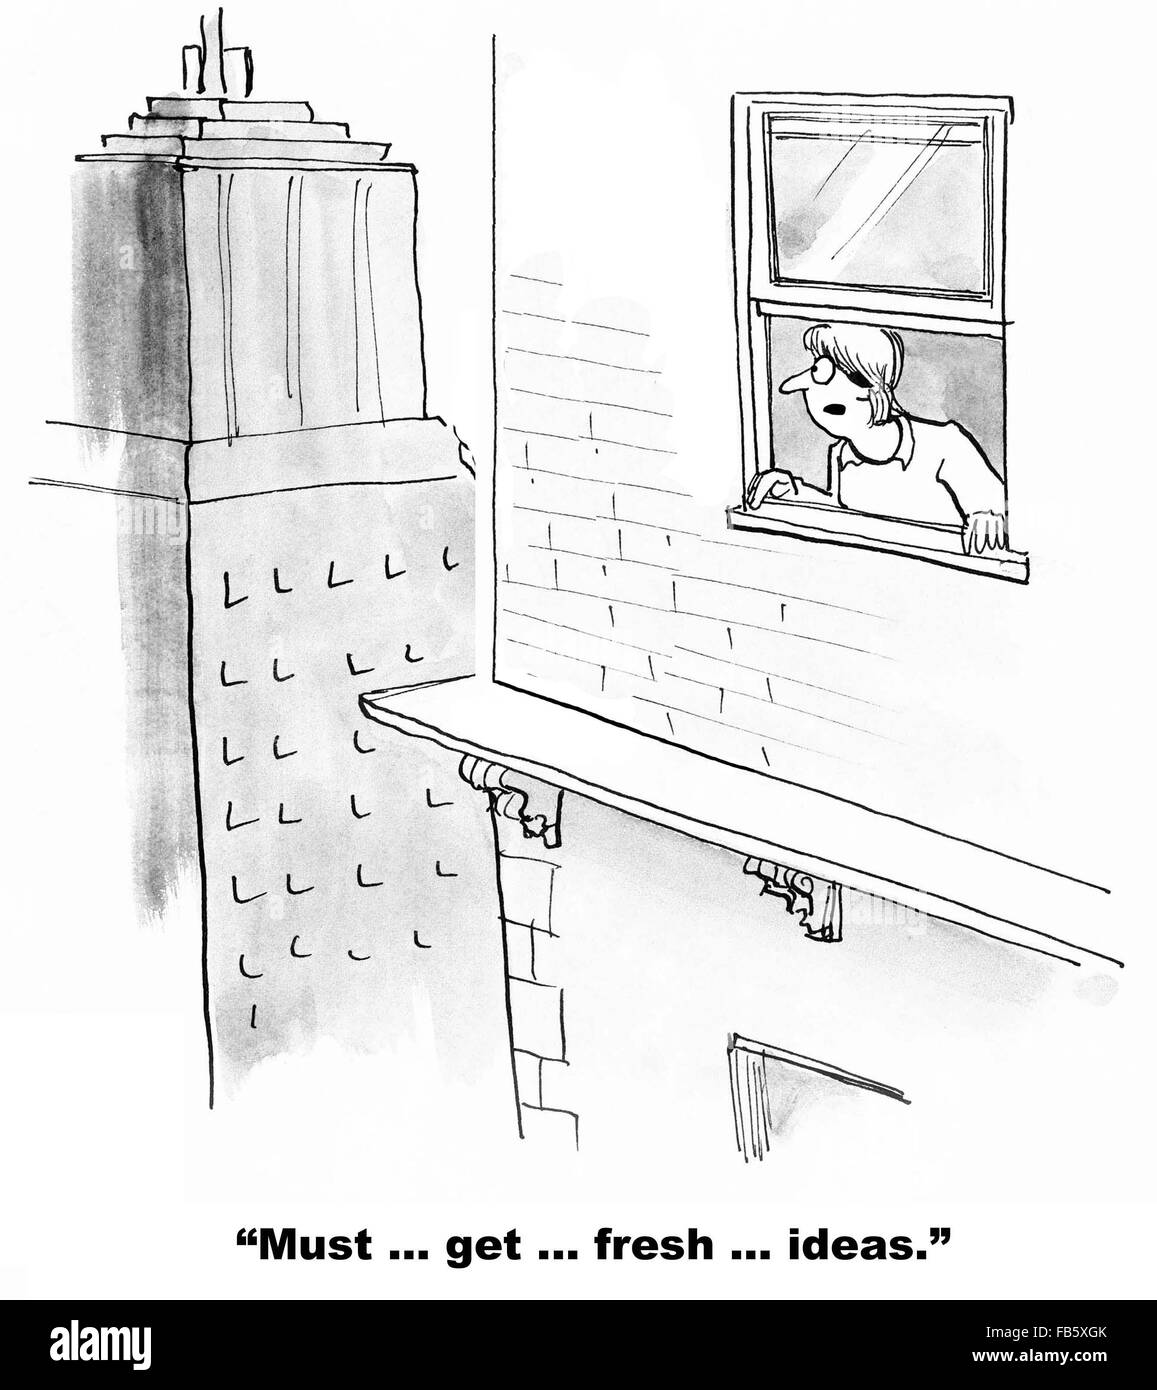 Business cartoon about innovation.  The businesswoman threw up the window, 'Must... get... fresh... ideas'. Stock Photo